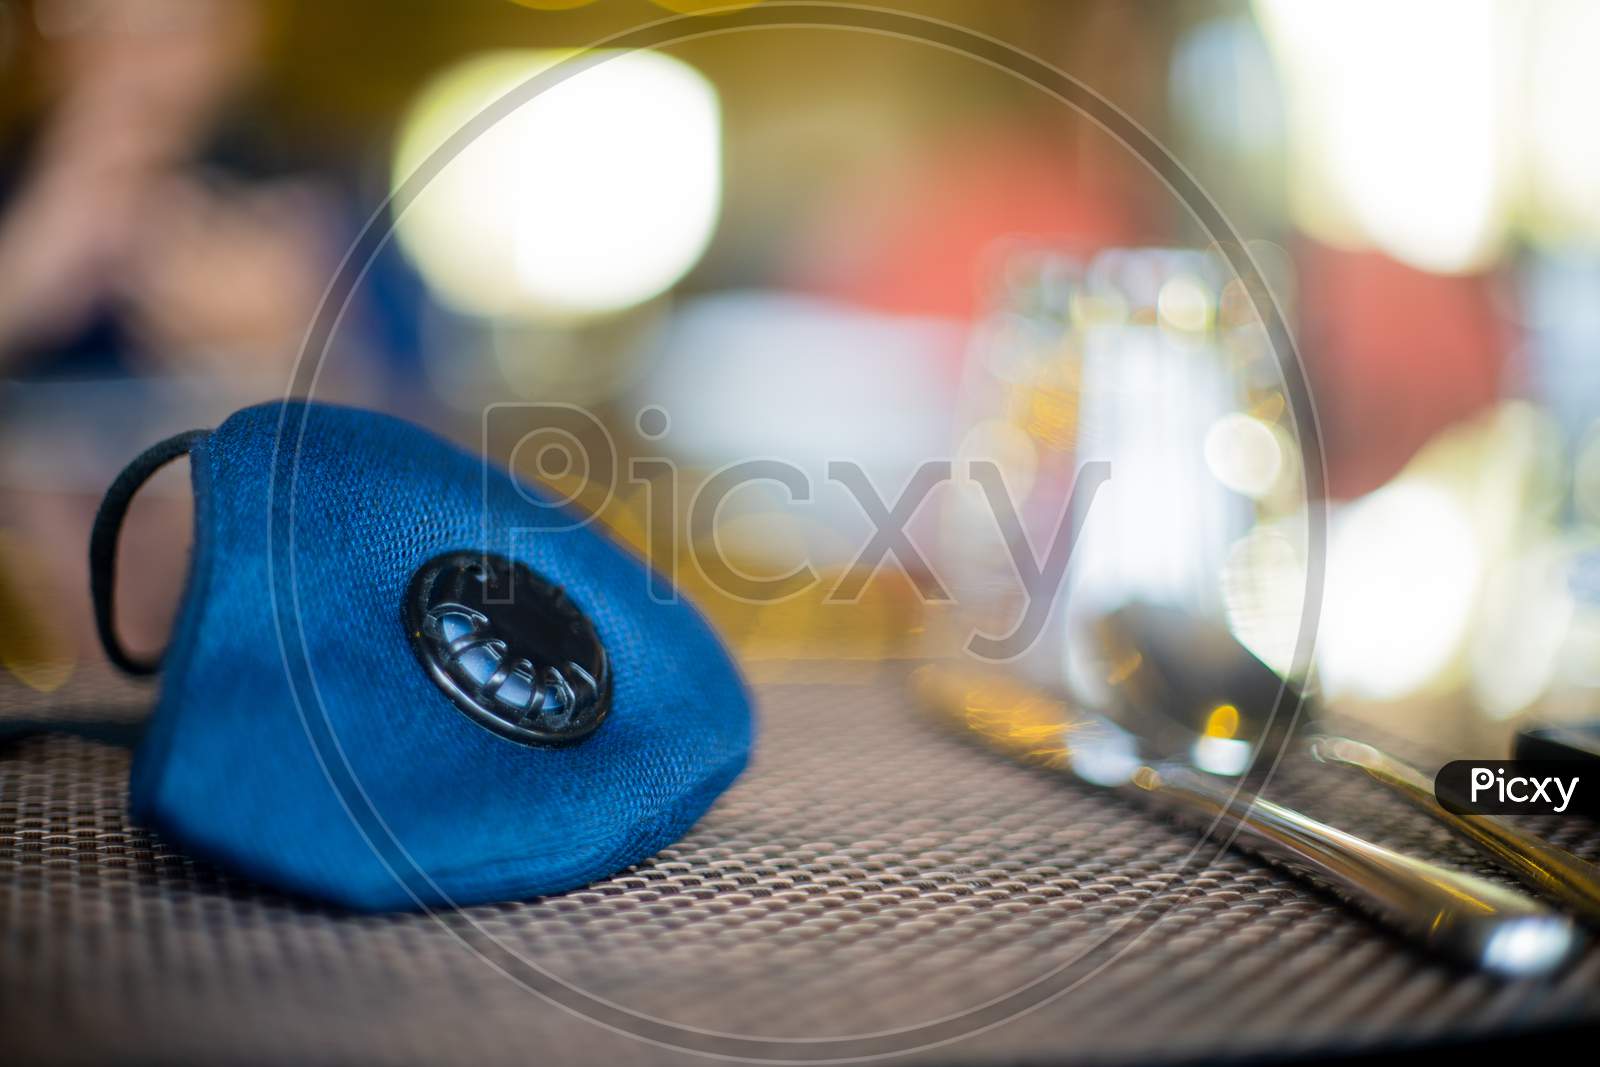 Blue Cloth Mask With Filter Placed On A Restuarant Table With Cutlery Knife And Fork Shot With An Out Of Focus Background